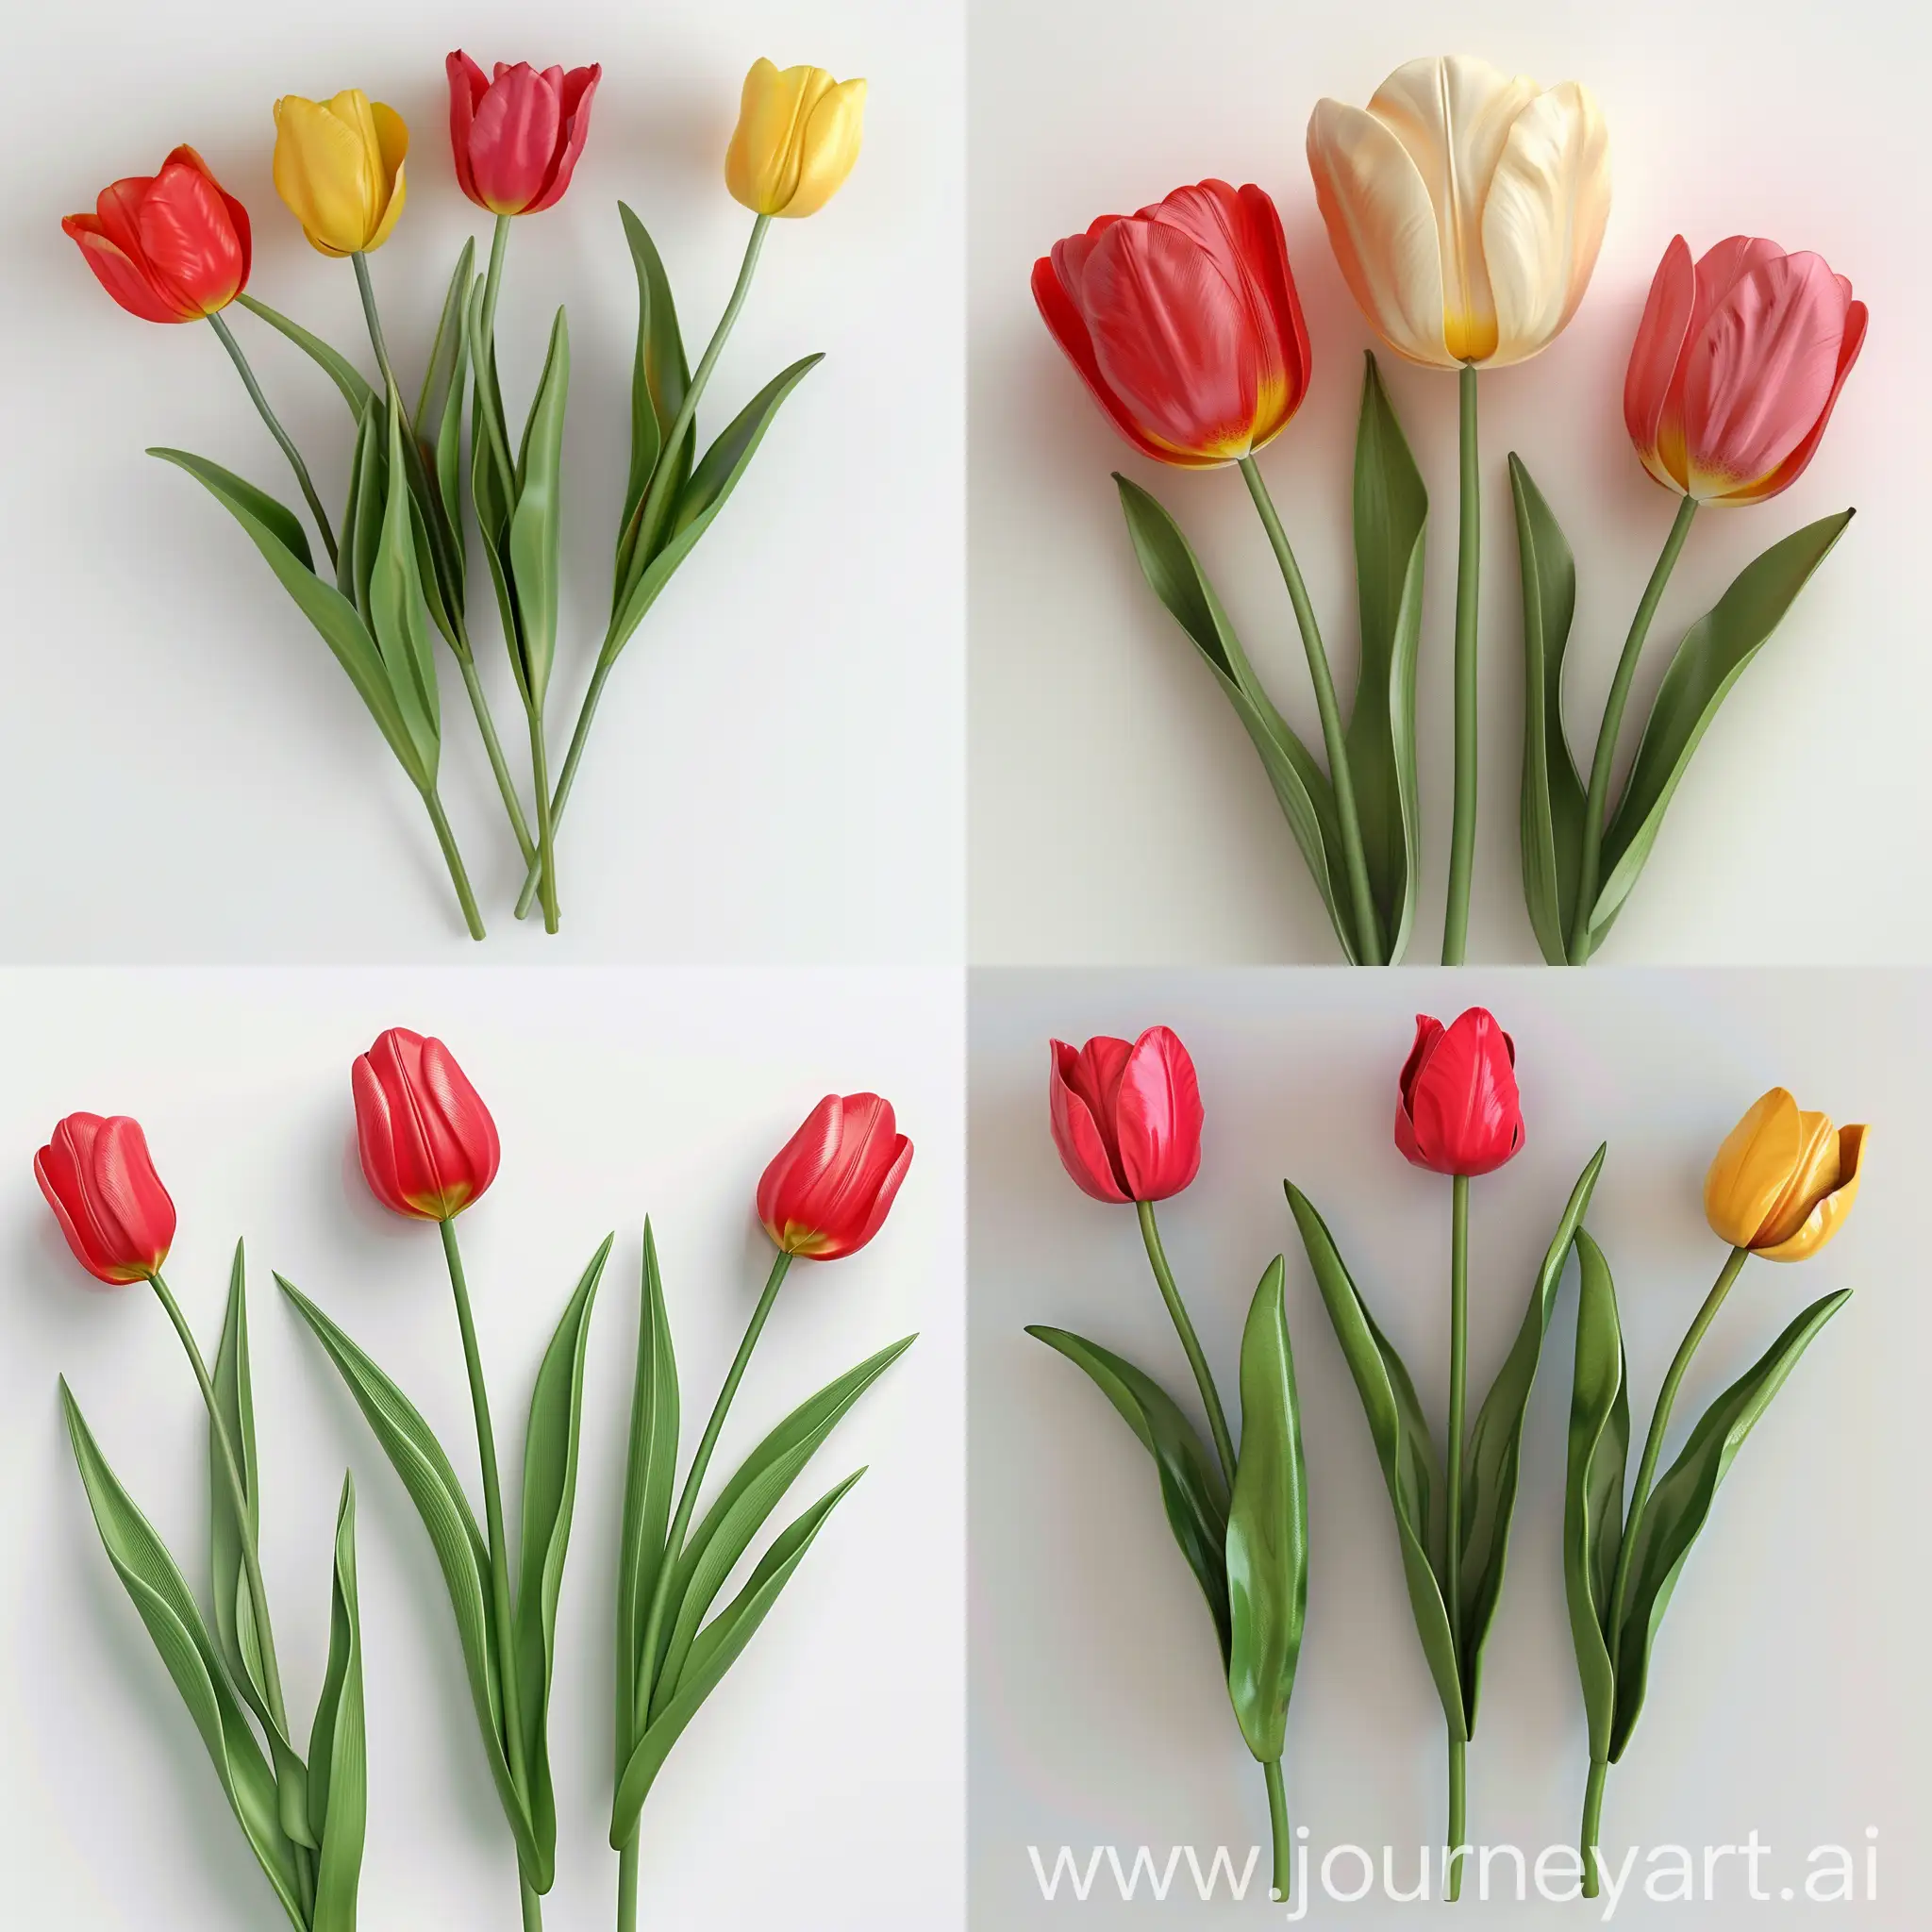 3d tulips on a white background
